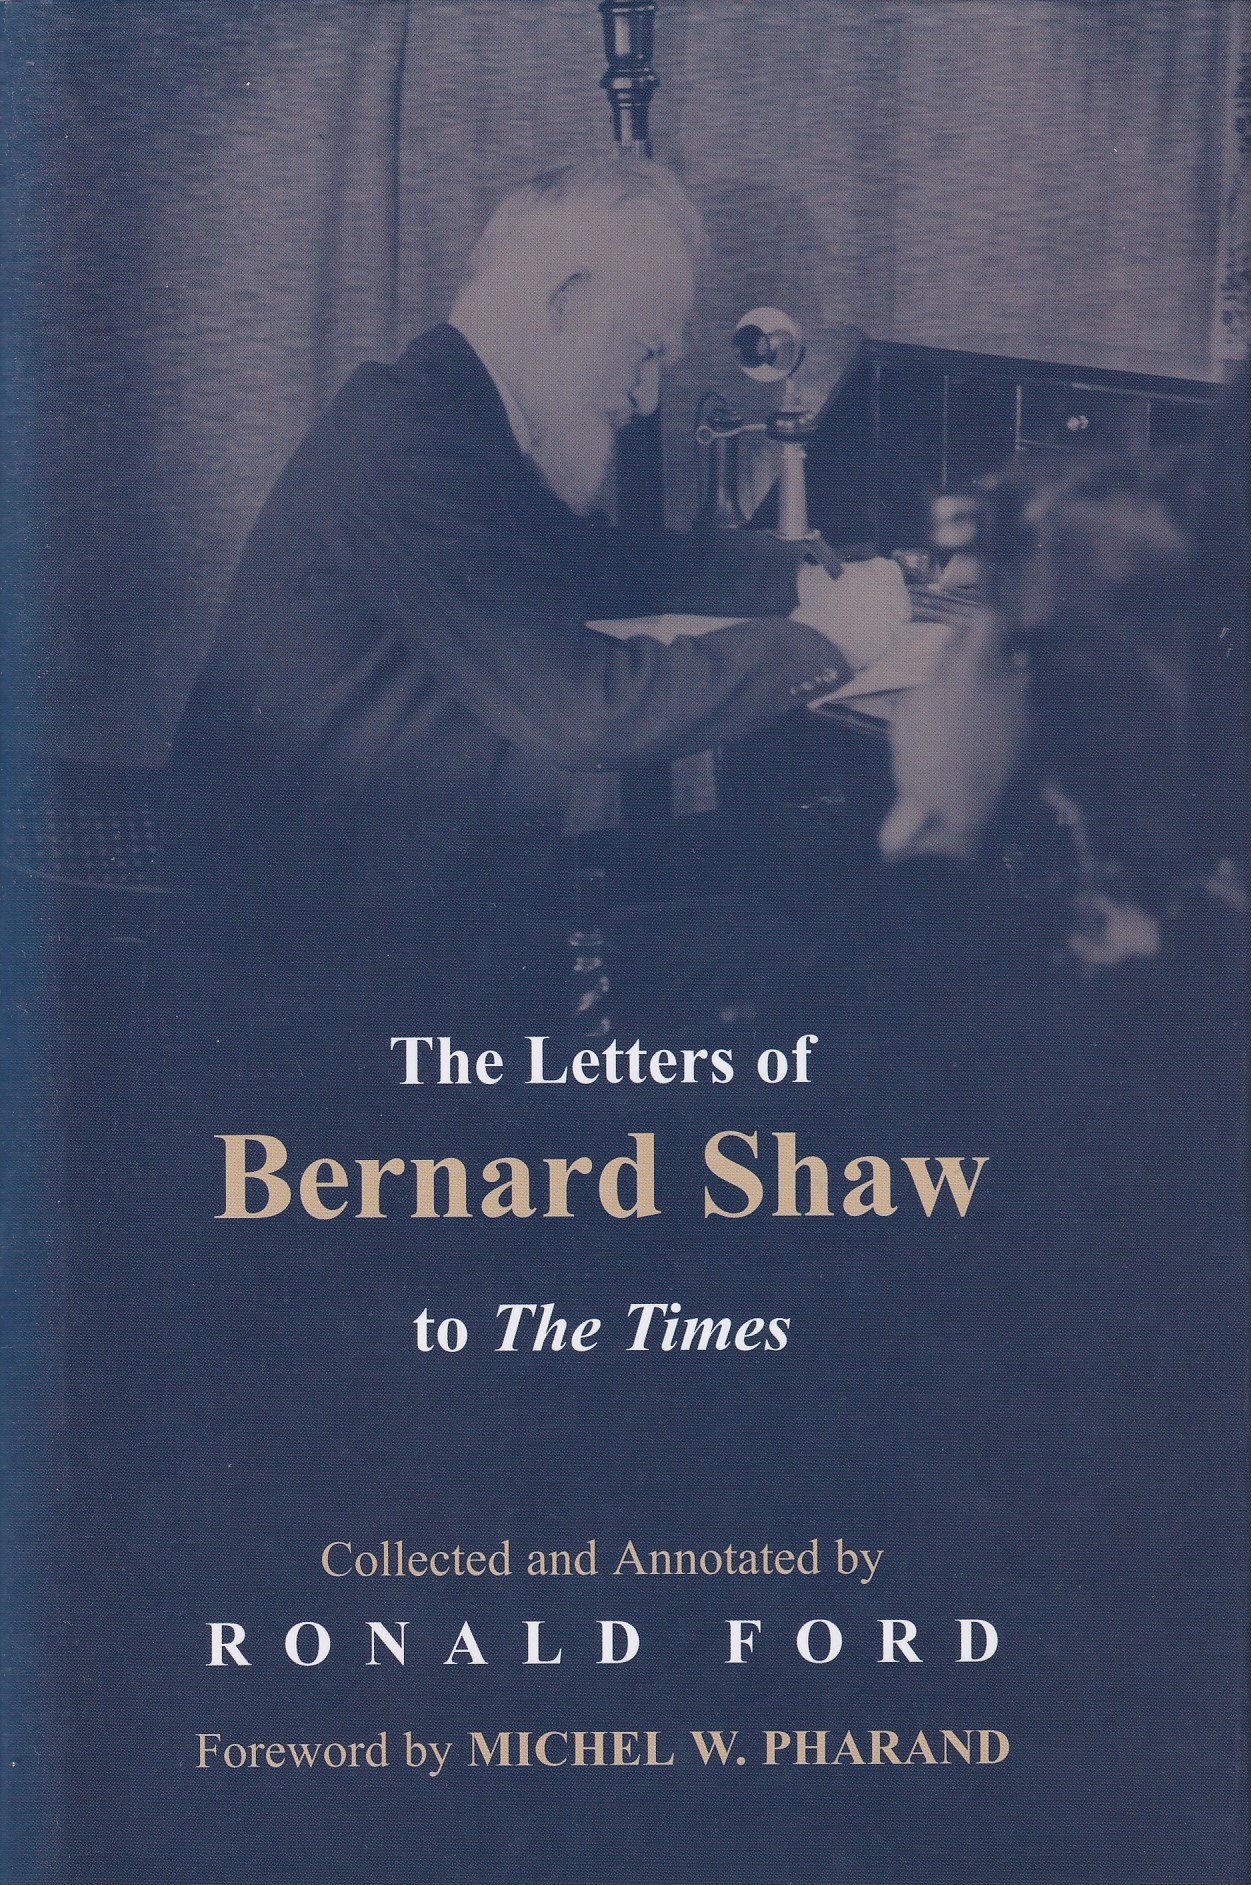 The Letters of Bernard Shaw to the Times | Ronald Ford (Coll. & Anno.) | Charlie Byrne's